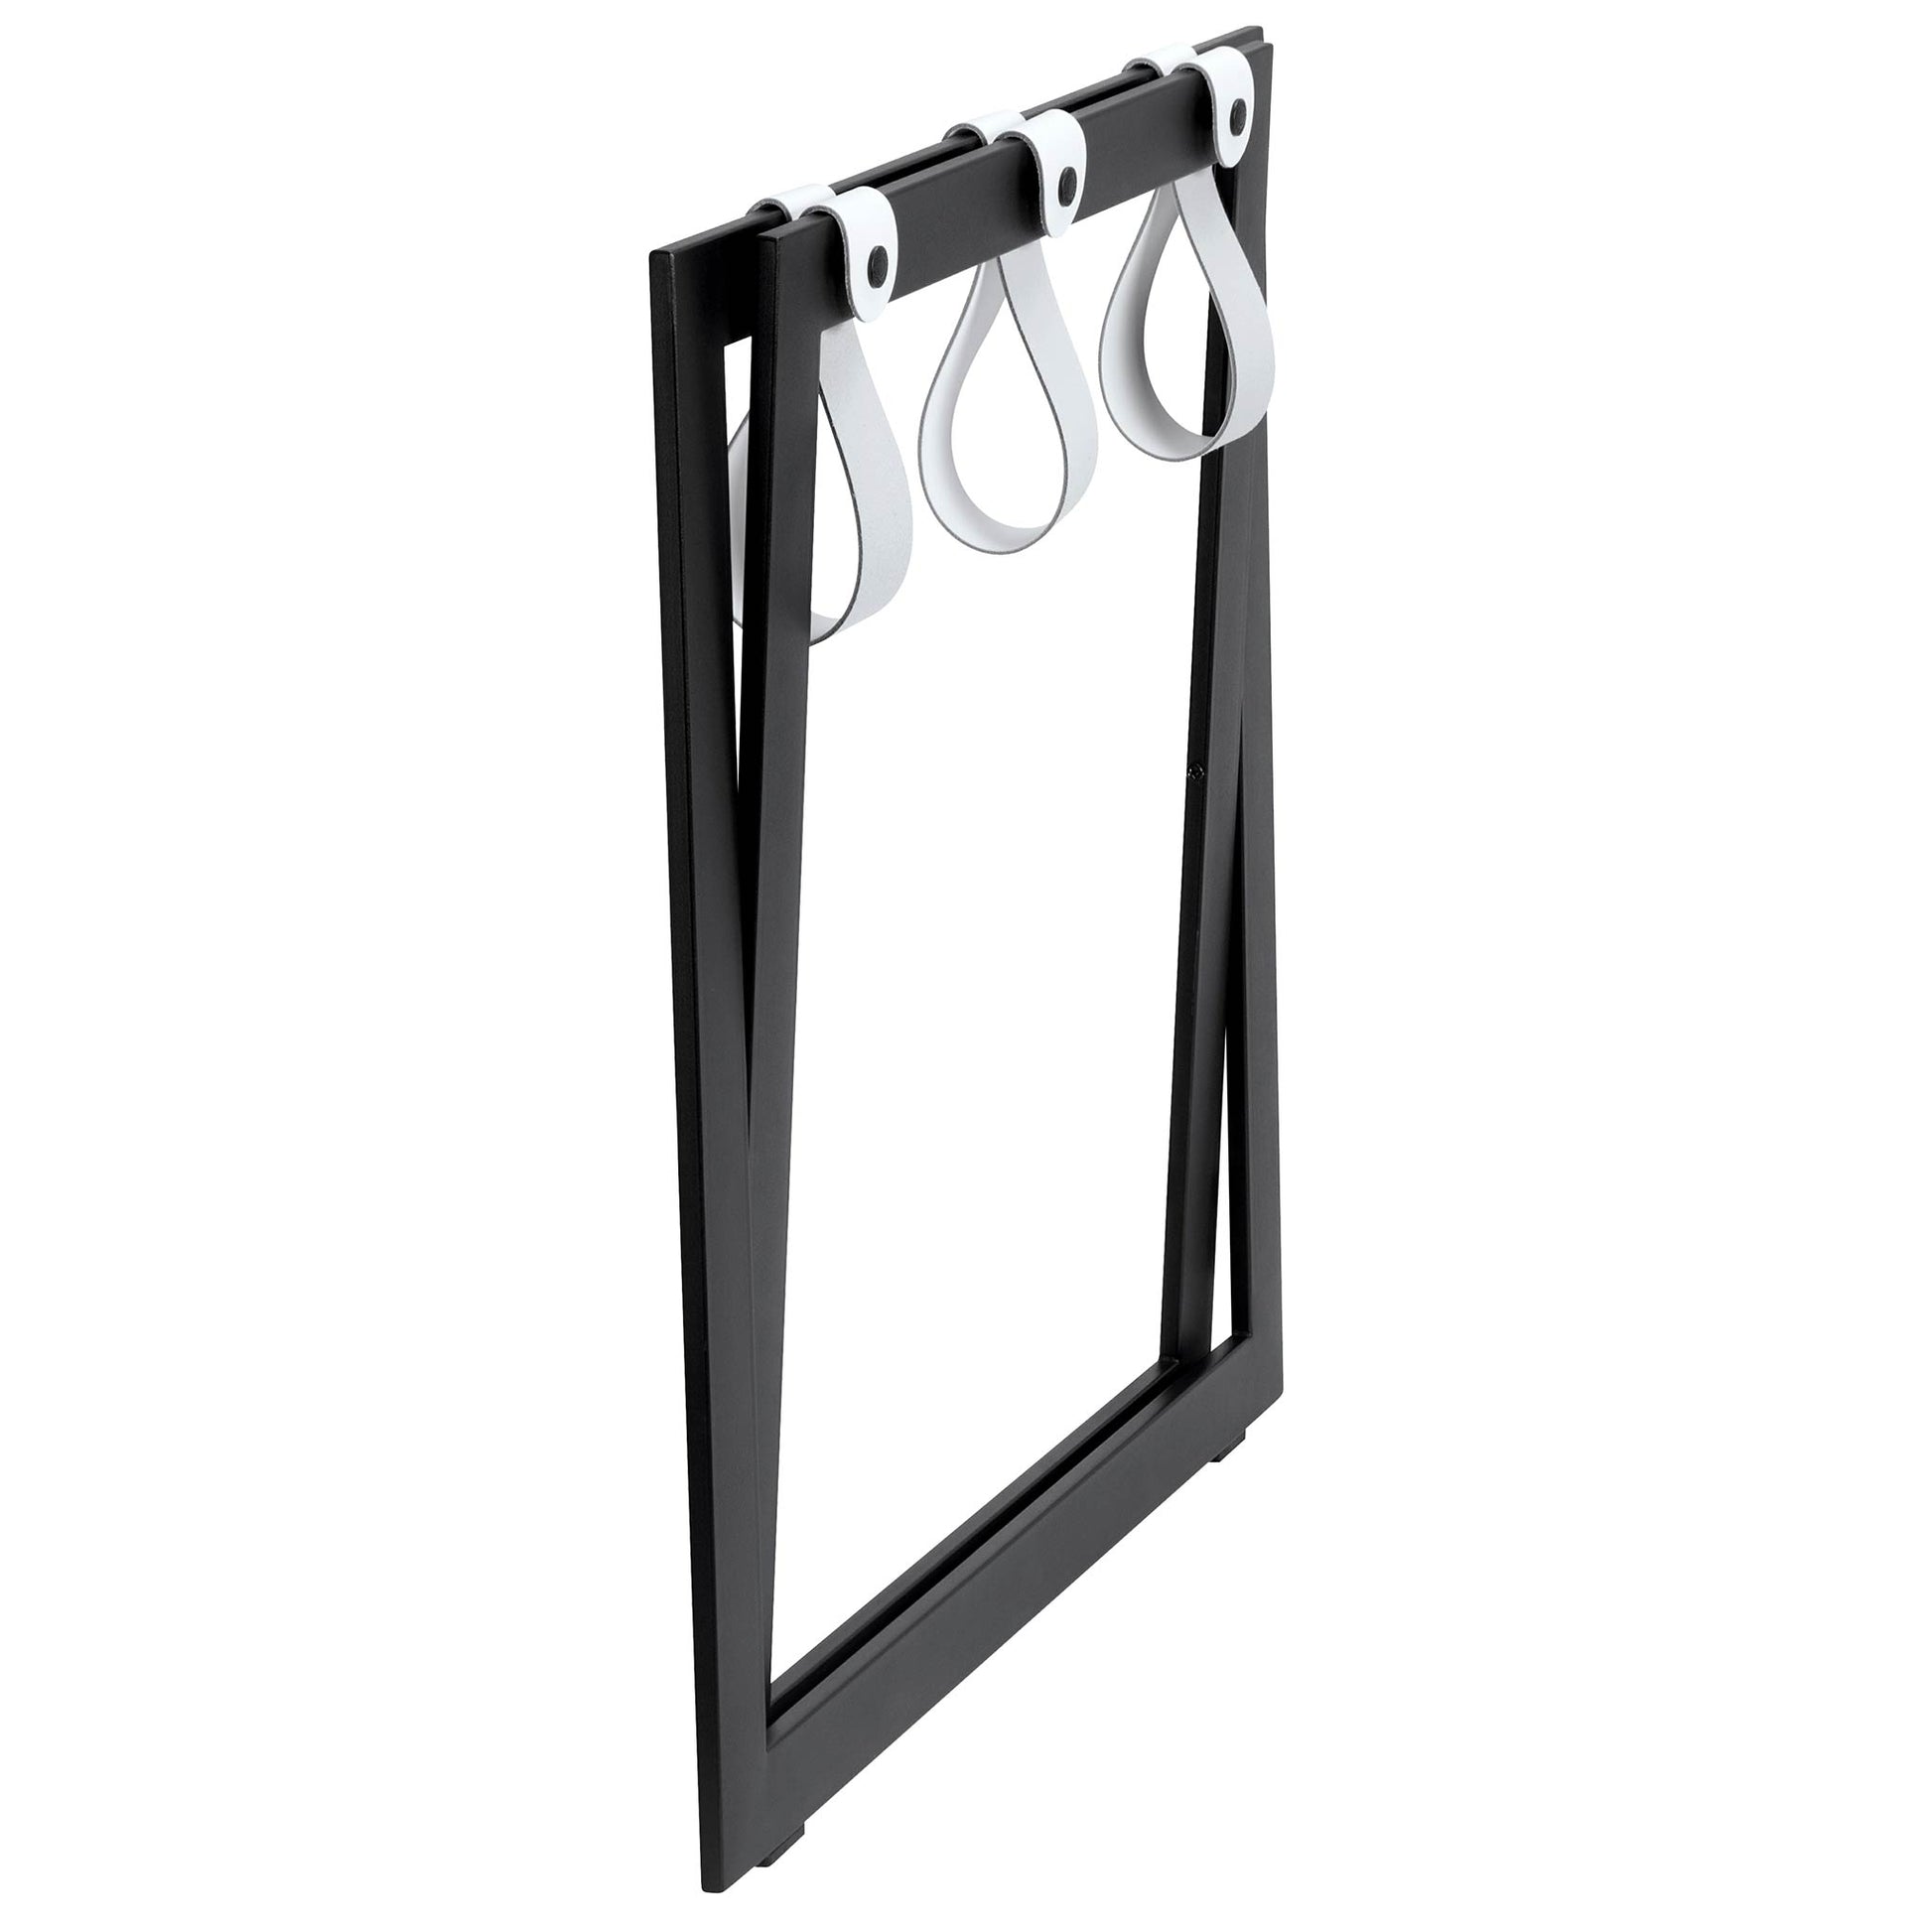 Roootz black steel compact hotel luggage rack folded with white leather straps